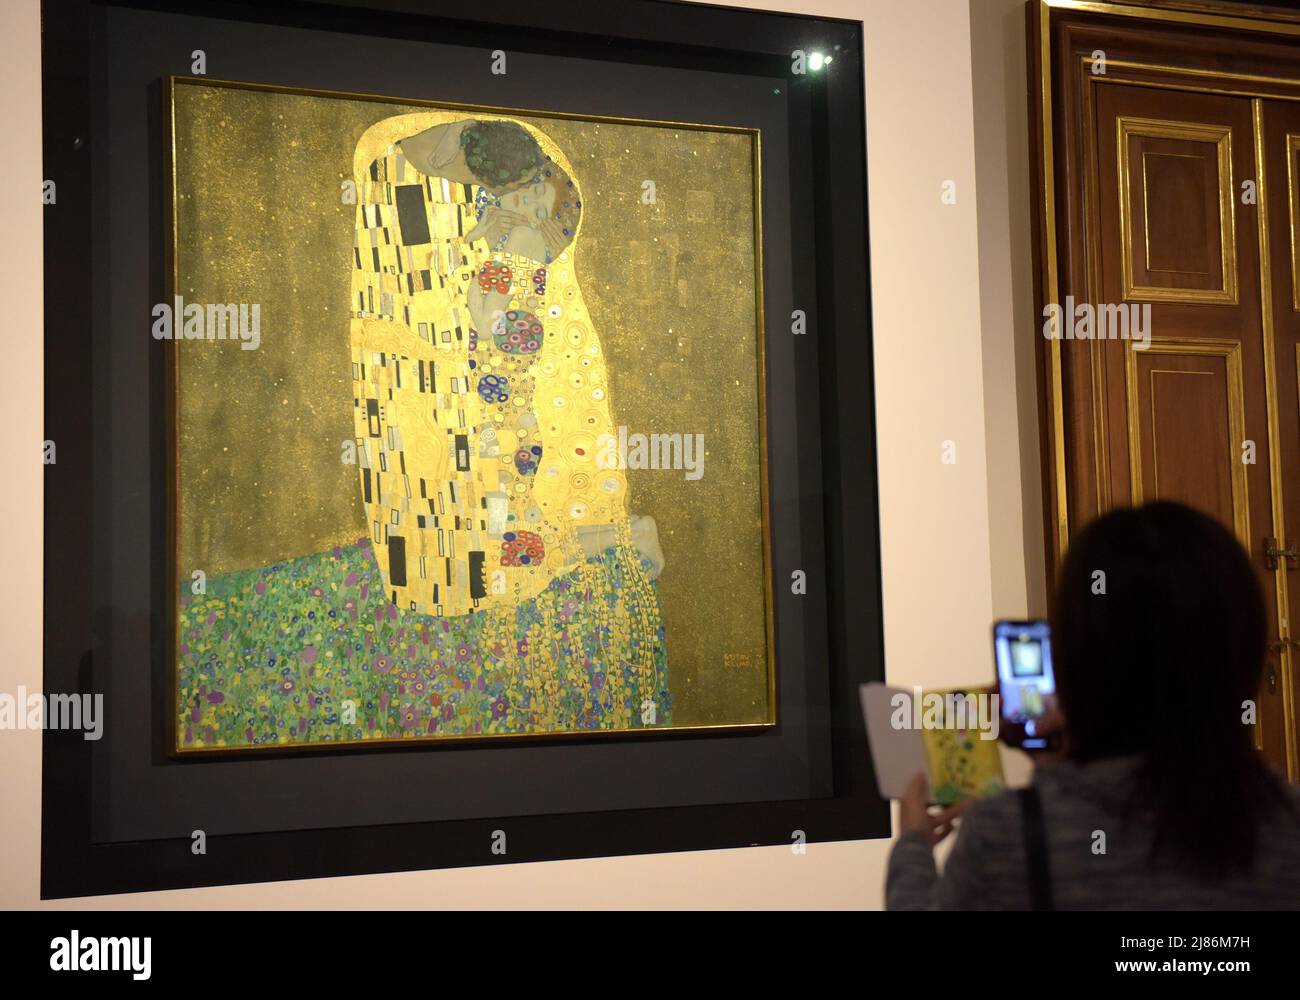 Vienna, Austria. 12th May, 2022. A visitor views 'The Kiss' by Gustav Klimt at the Upper Belvedere in Vienna, Austria, May 12, 2022. The Upper Belvedere in Vienna houses one of Austria's most valuable art collections - with key works by Gustav Klimt, Egon Schiele and Oskar Kokoschka. The heart of the Belvedere collection is formed by the 24 paintings of Gustav Klimt with his golden images 'The Kiss' and 'Judith'. 'The Kiss' in particular is world-famous. Credit: Guo Chen/Xinhua/Alamy Live News Stock Photo